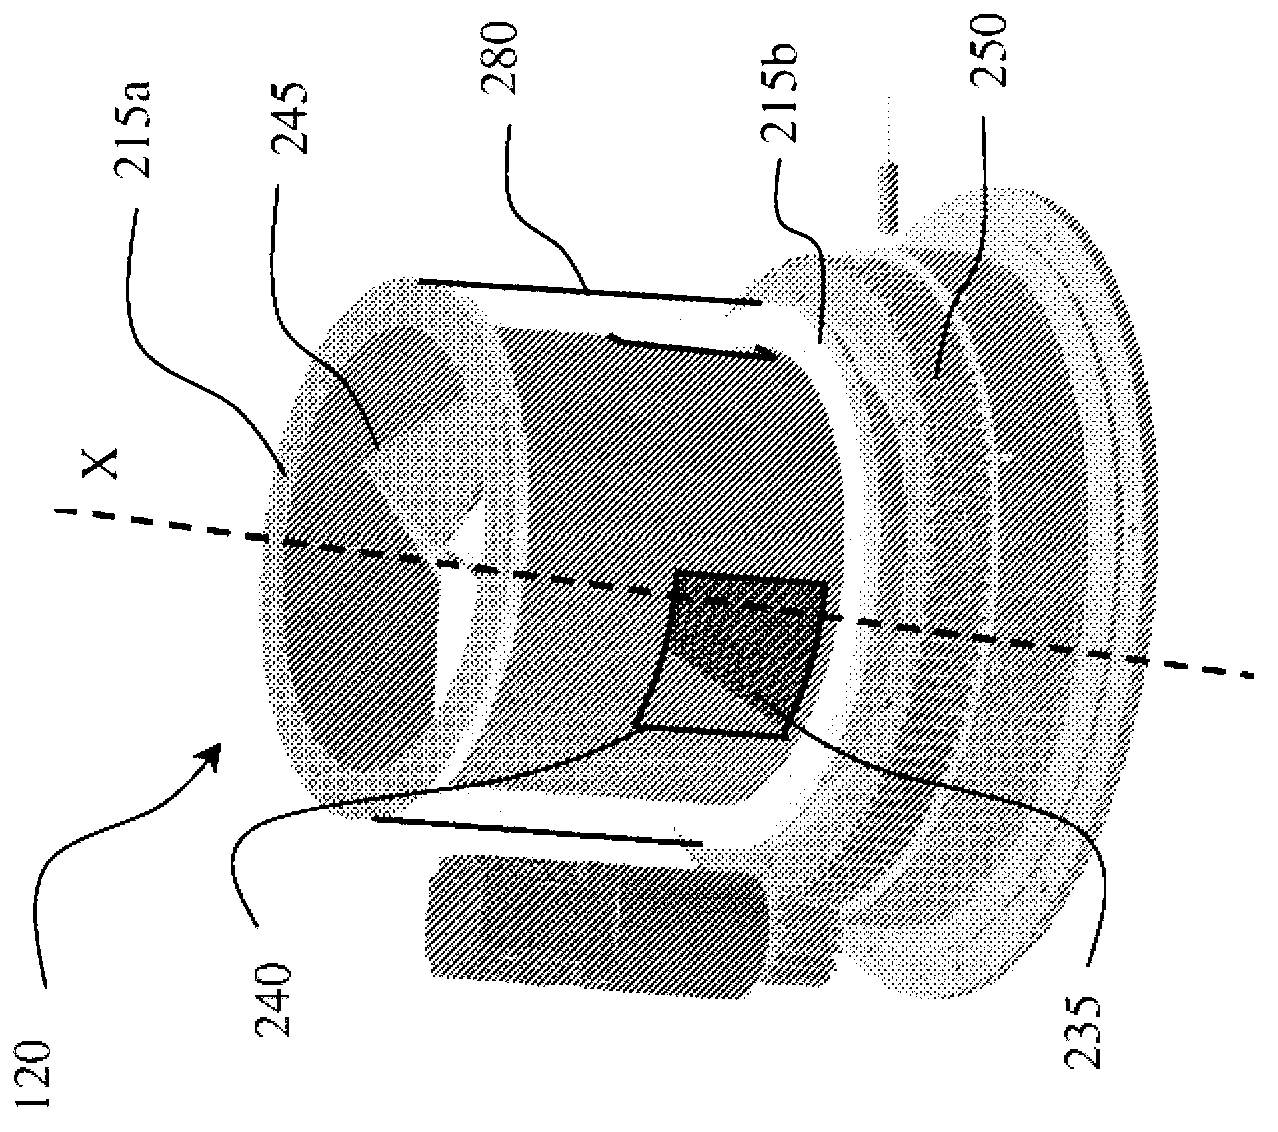 Valve device for high voltage cable insulator manufacturing